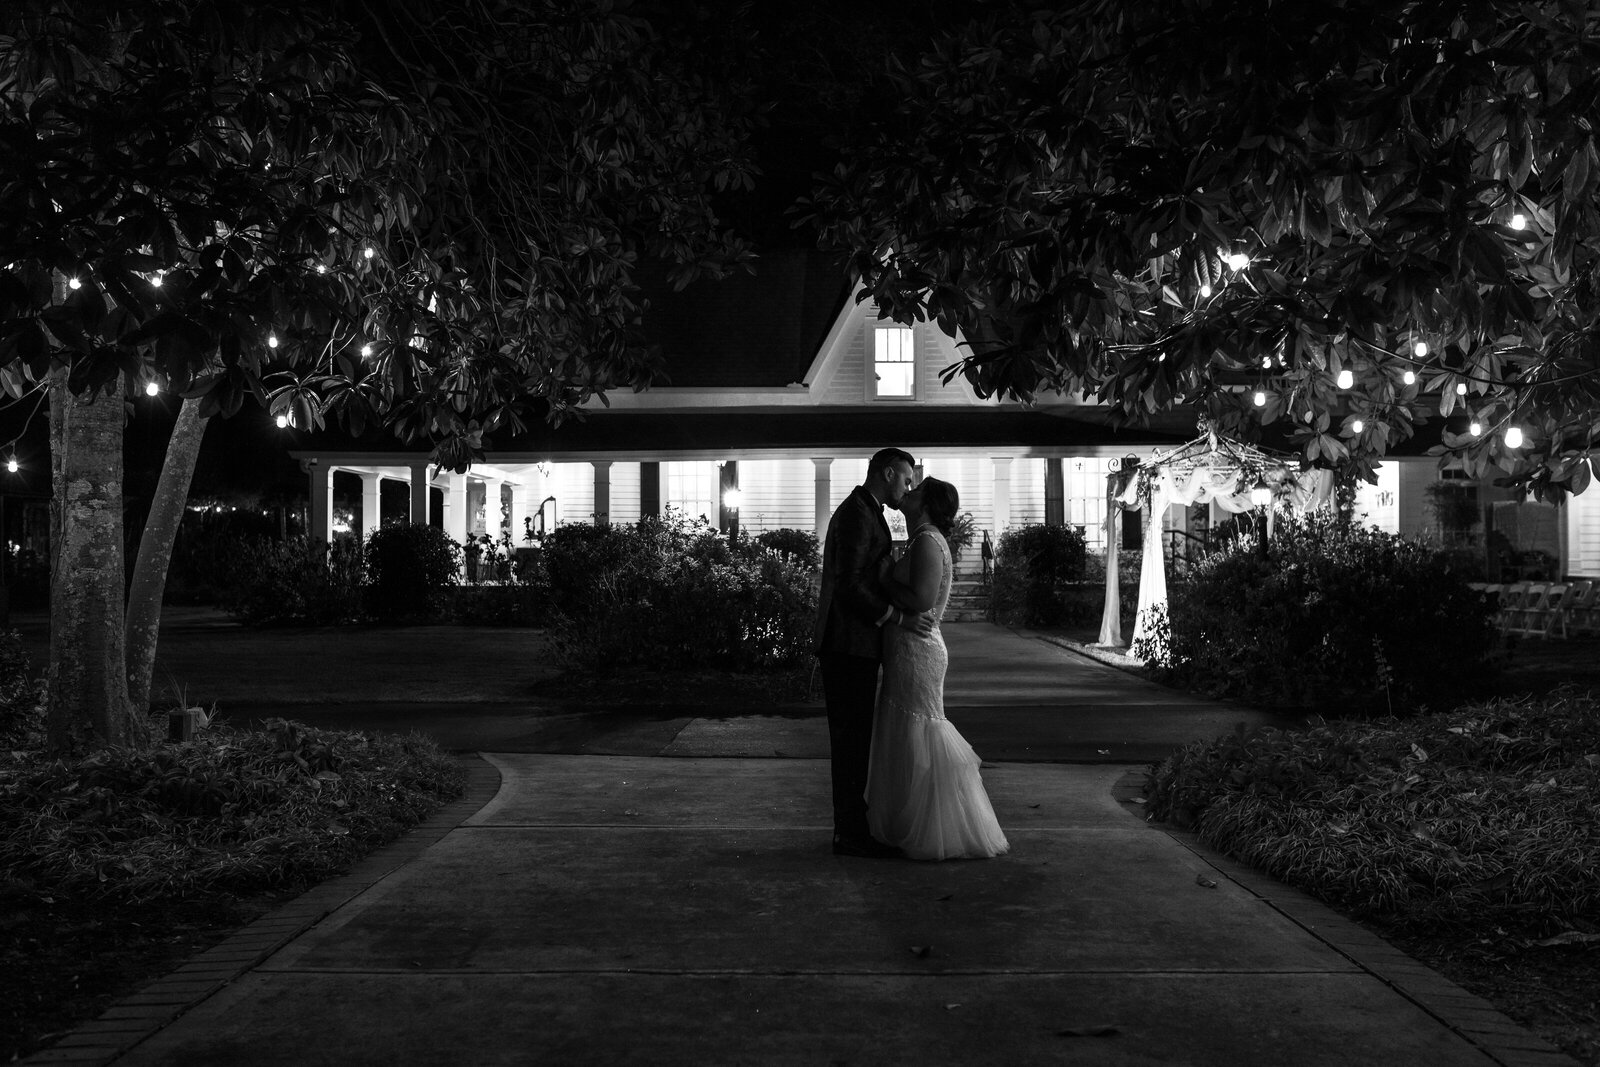 Night time photo of bride & groom kissing backlit by the house.